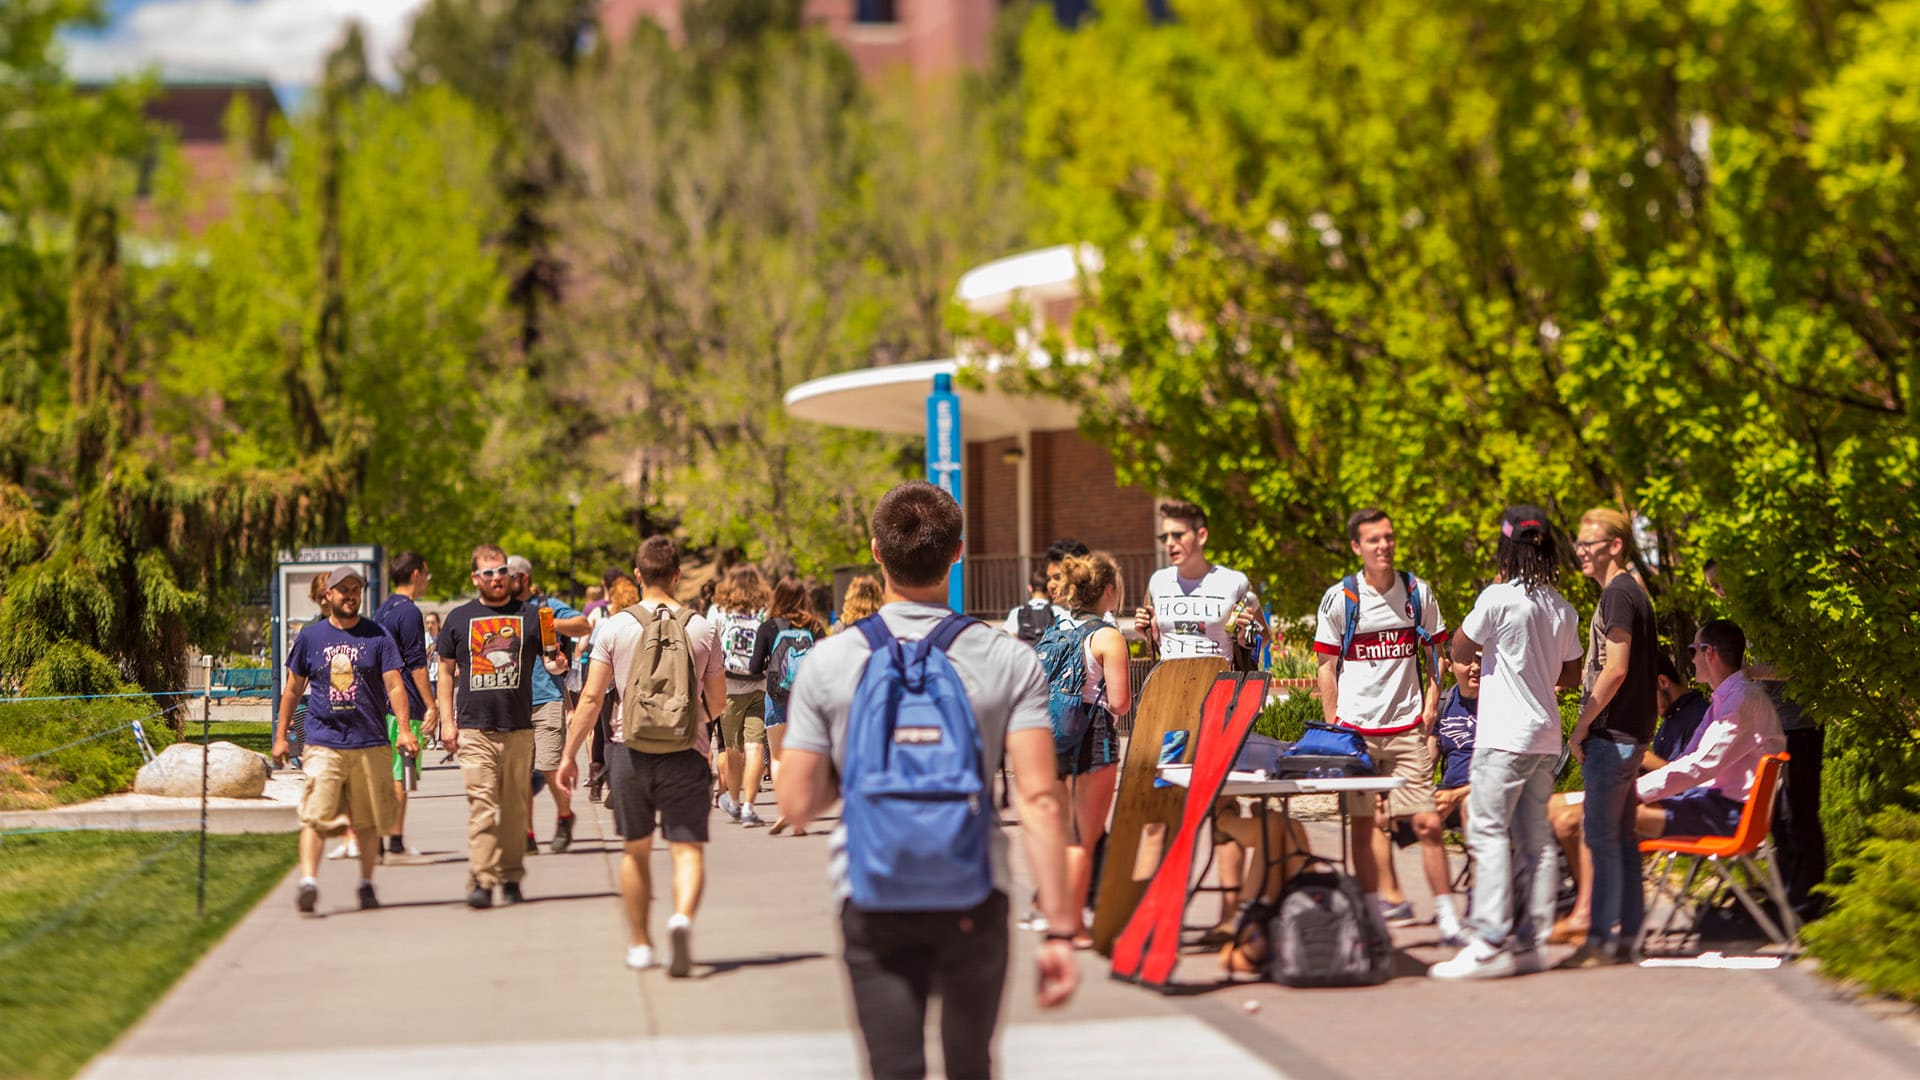 A group of students walk through the lower quad area at the University of Nevada, Reno.